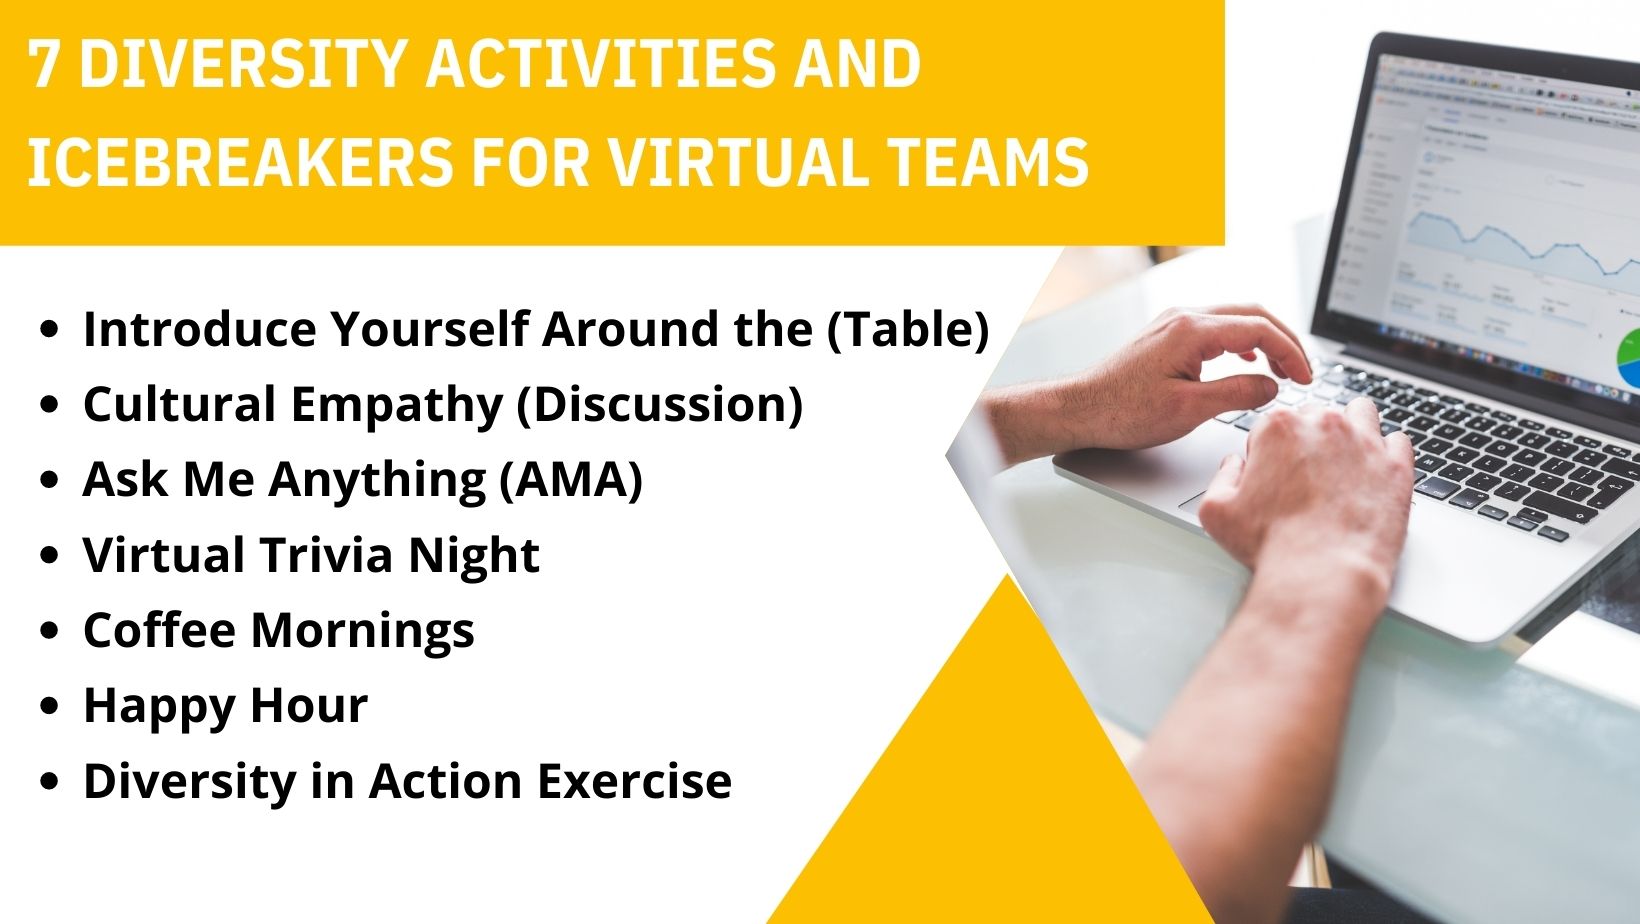 7 Diversity Activities and Icebreakers for Virtual Teams